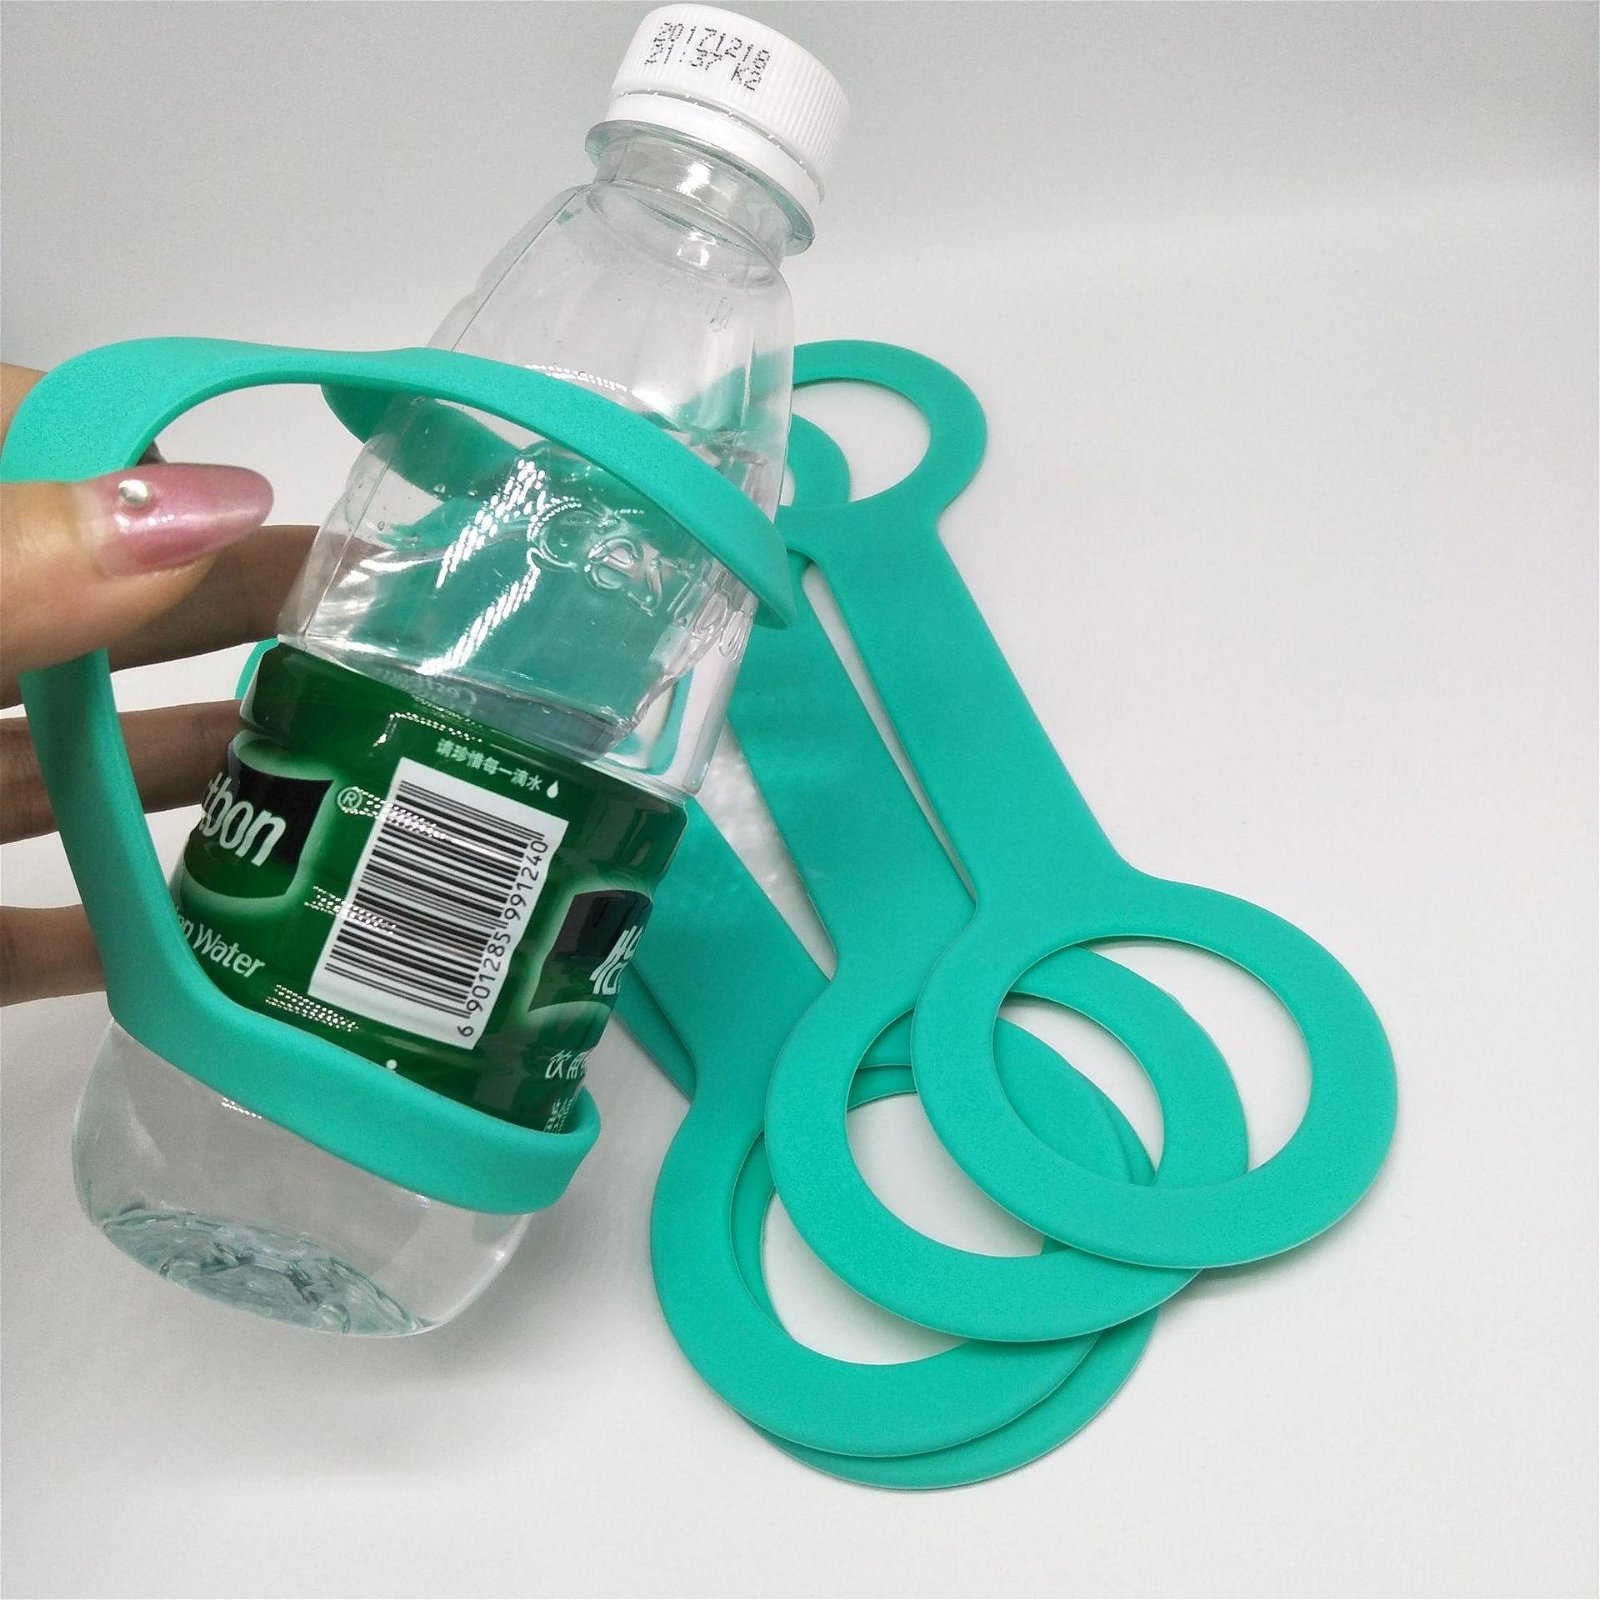 Silicone Water Bottle Carrier Grip Water Handle Grip Cup Strap 2